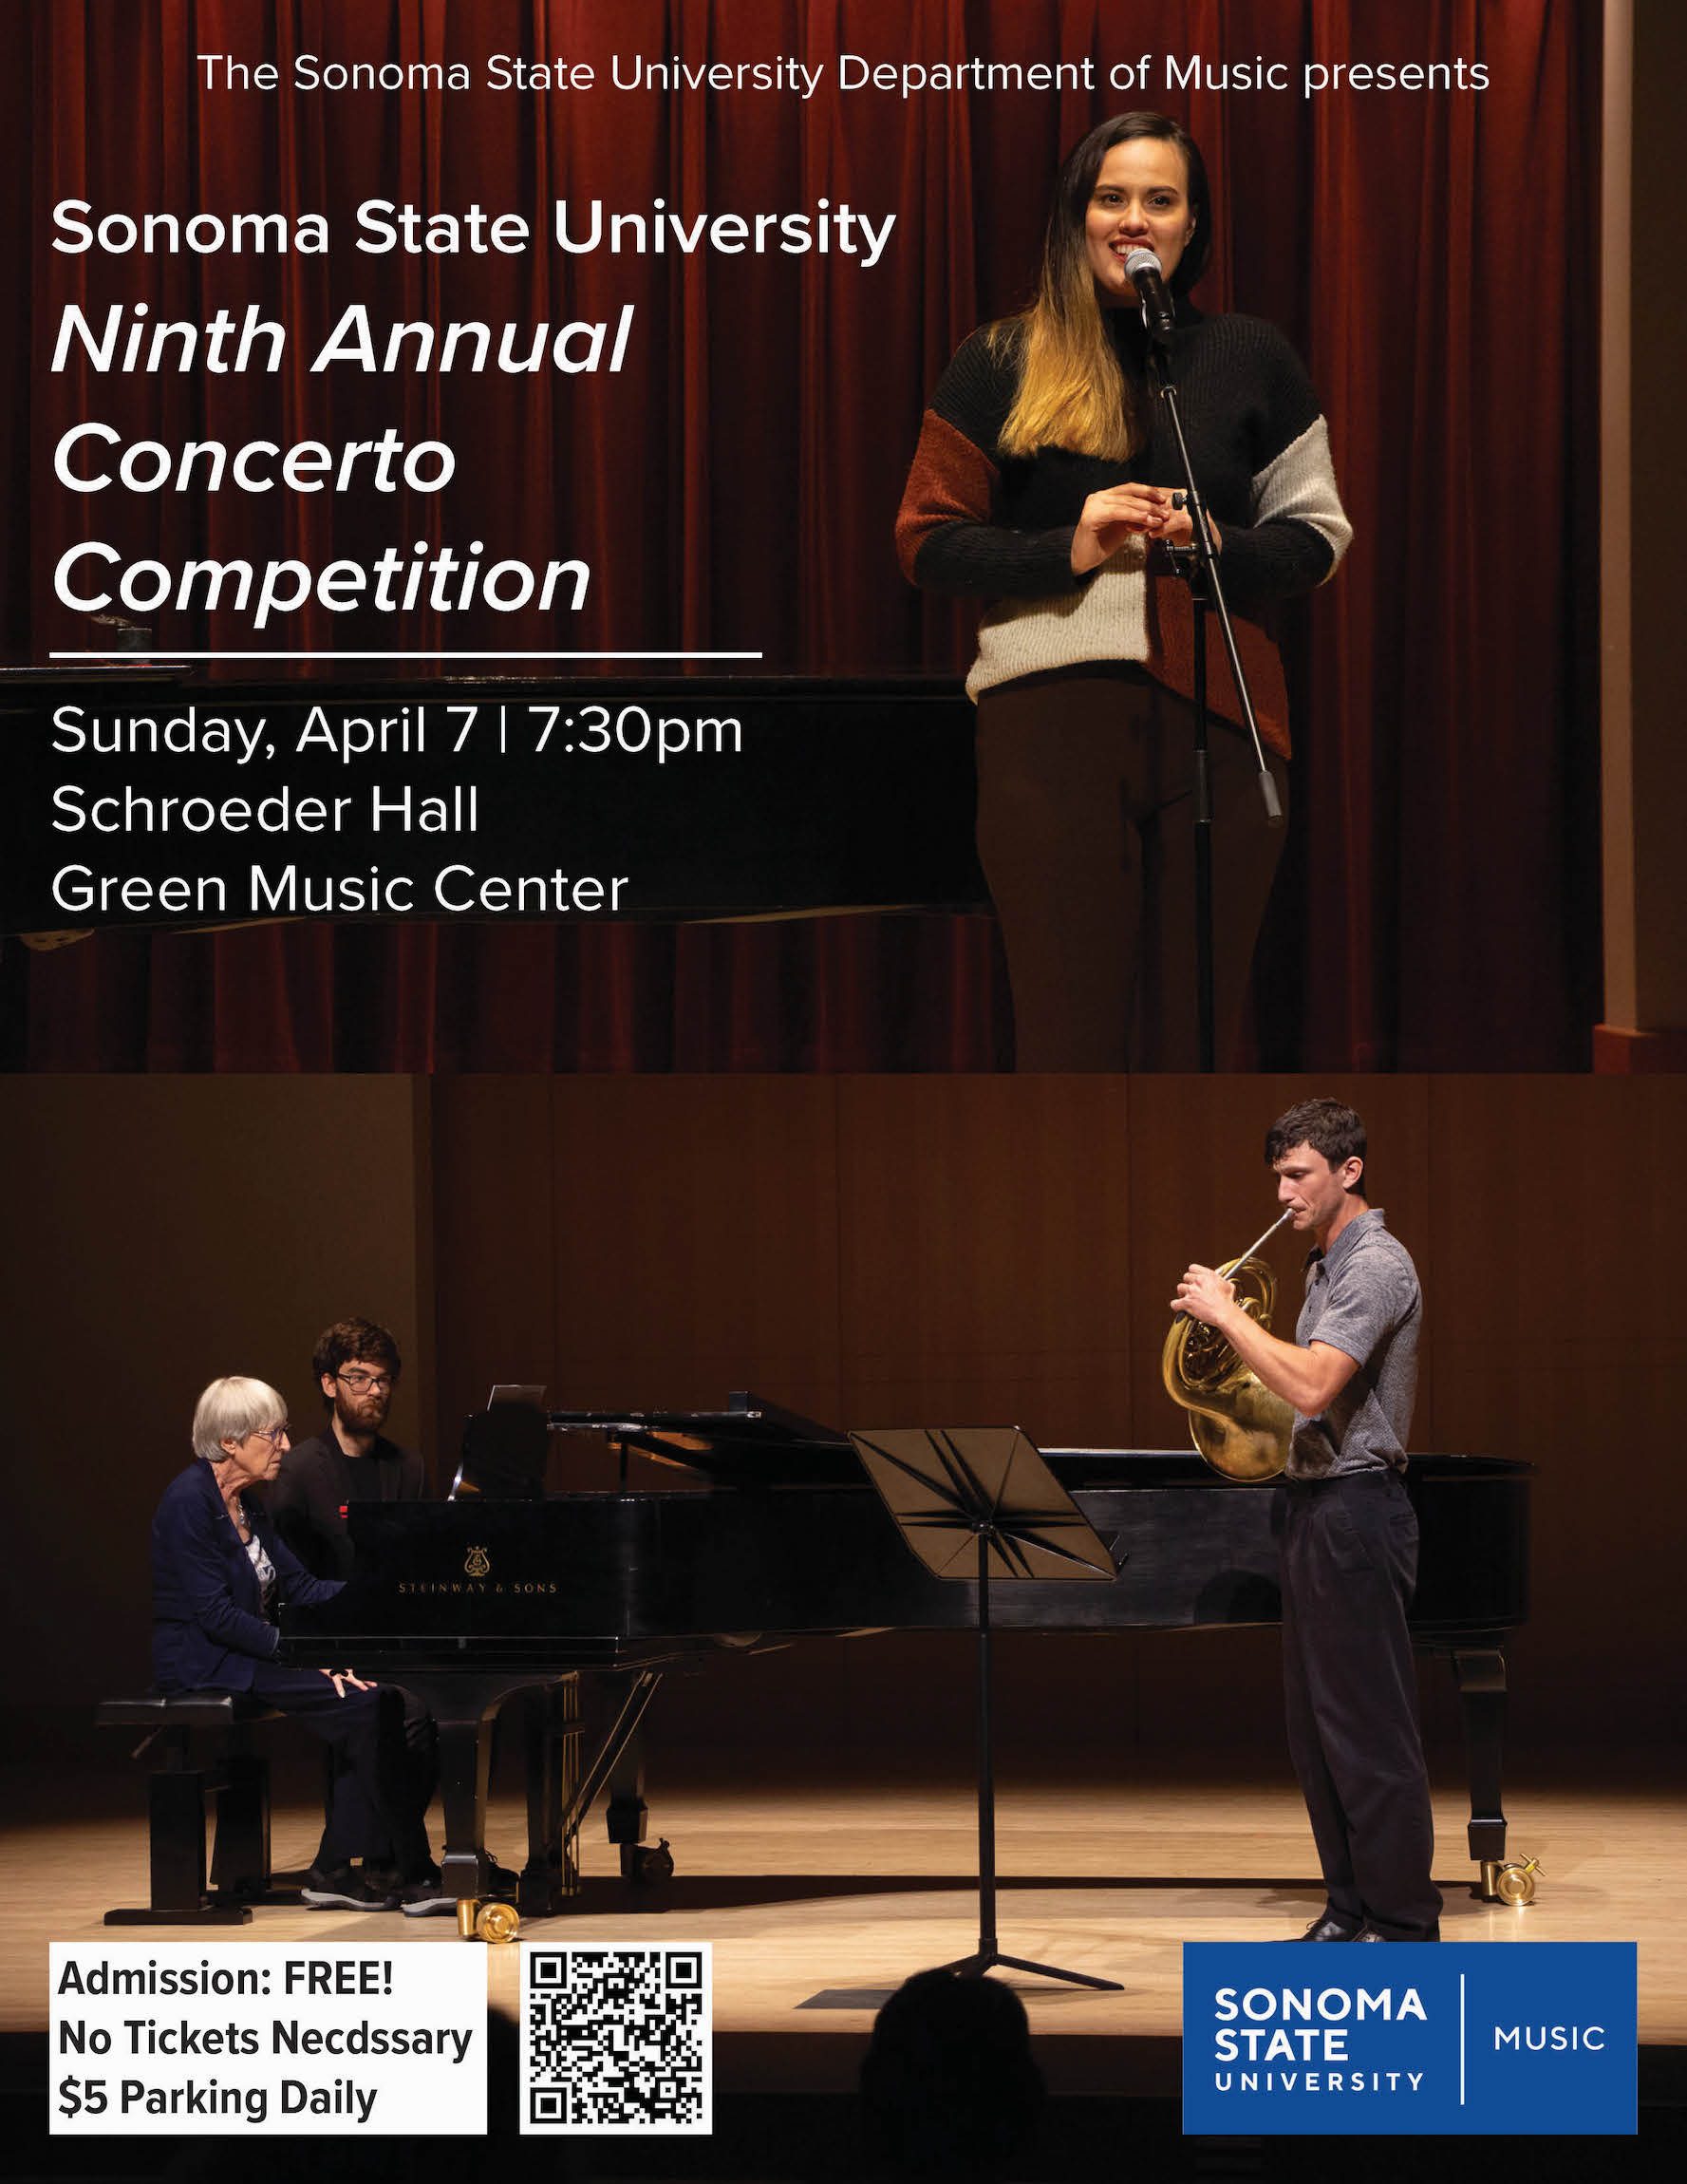 Concerto Competition flyer